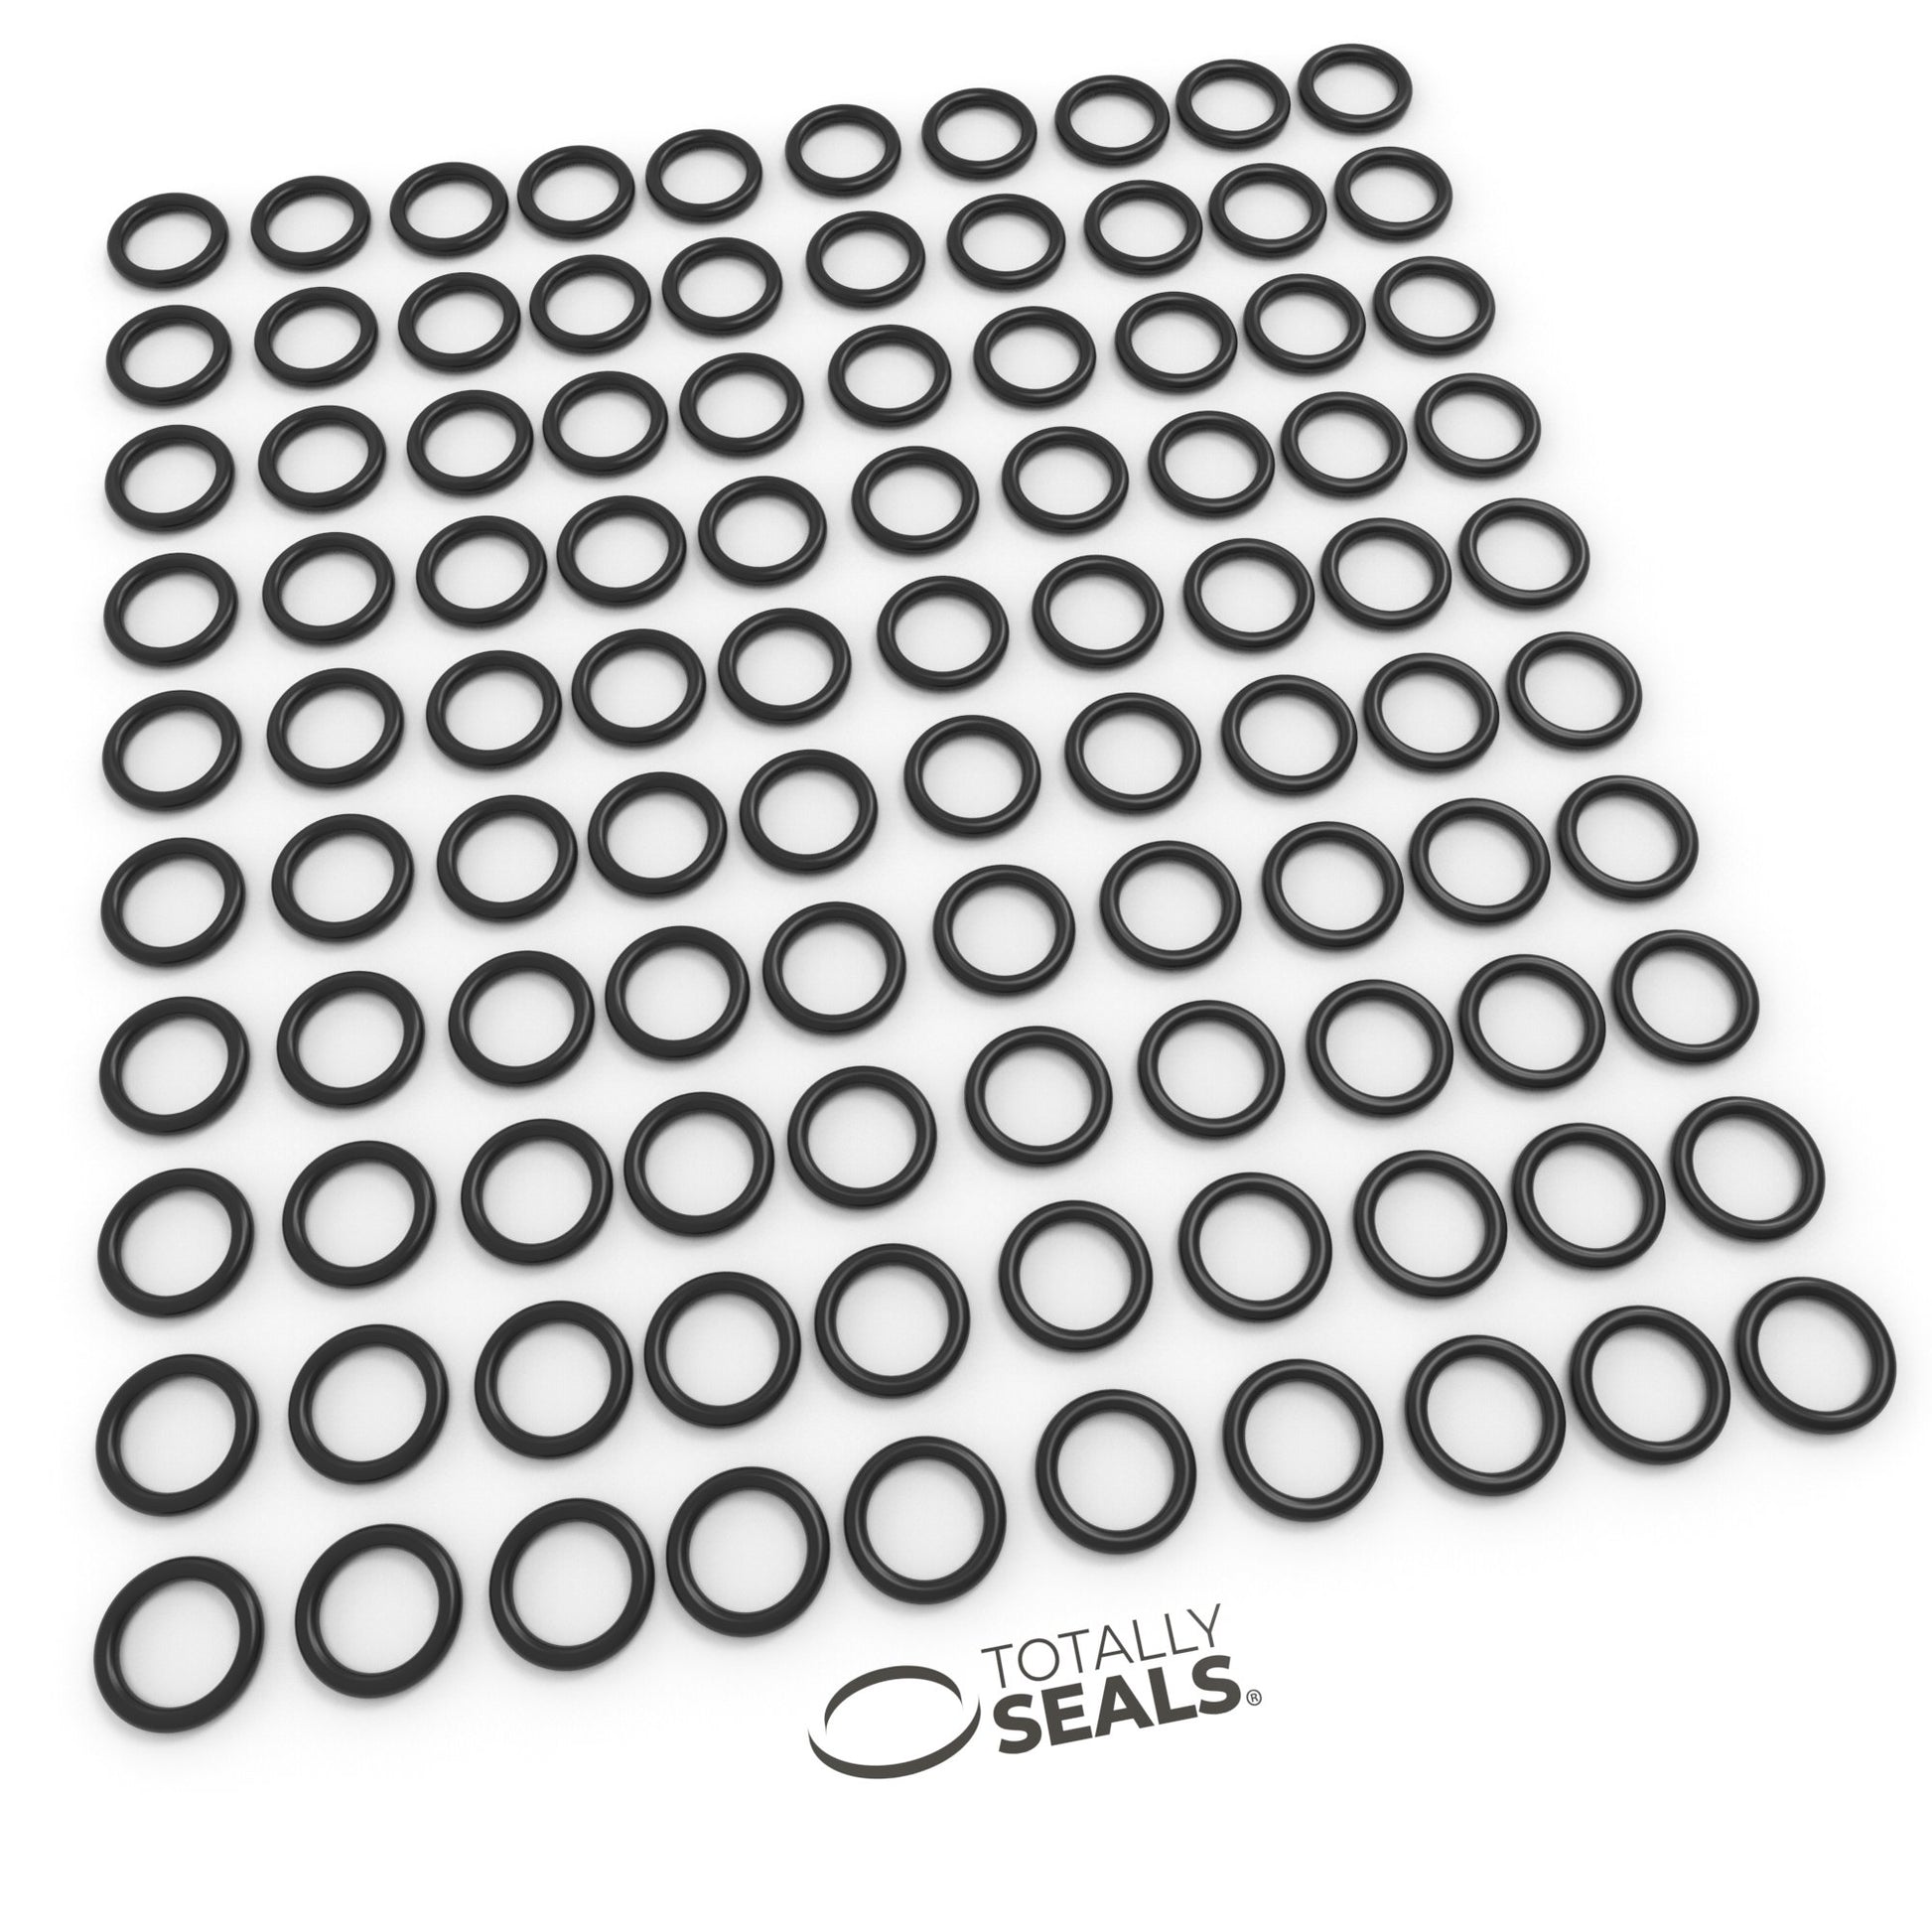 32mm x 2.5mm (37mm OD) Nitrile O-Rings - Totally Seals®